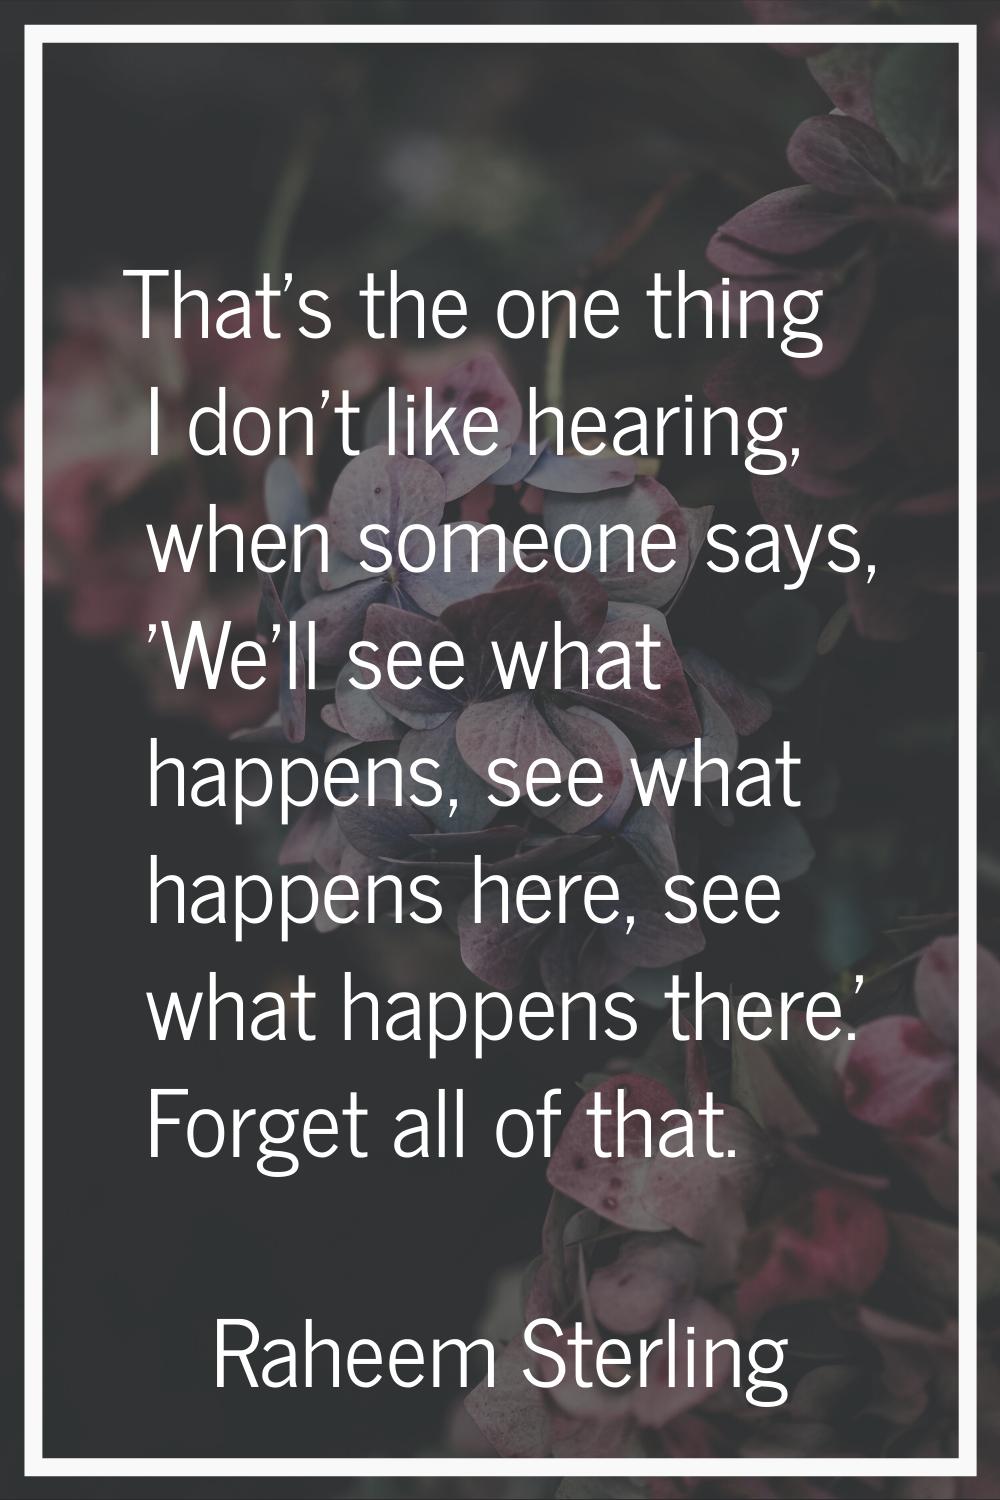 That's the one thing I don't like hearing, when someone says, 'We'll see what happens, see what hap